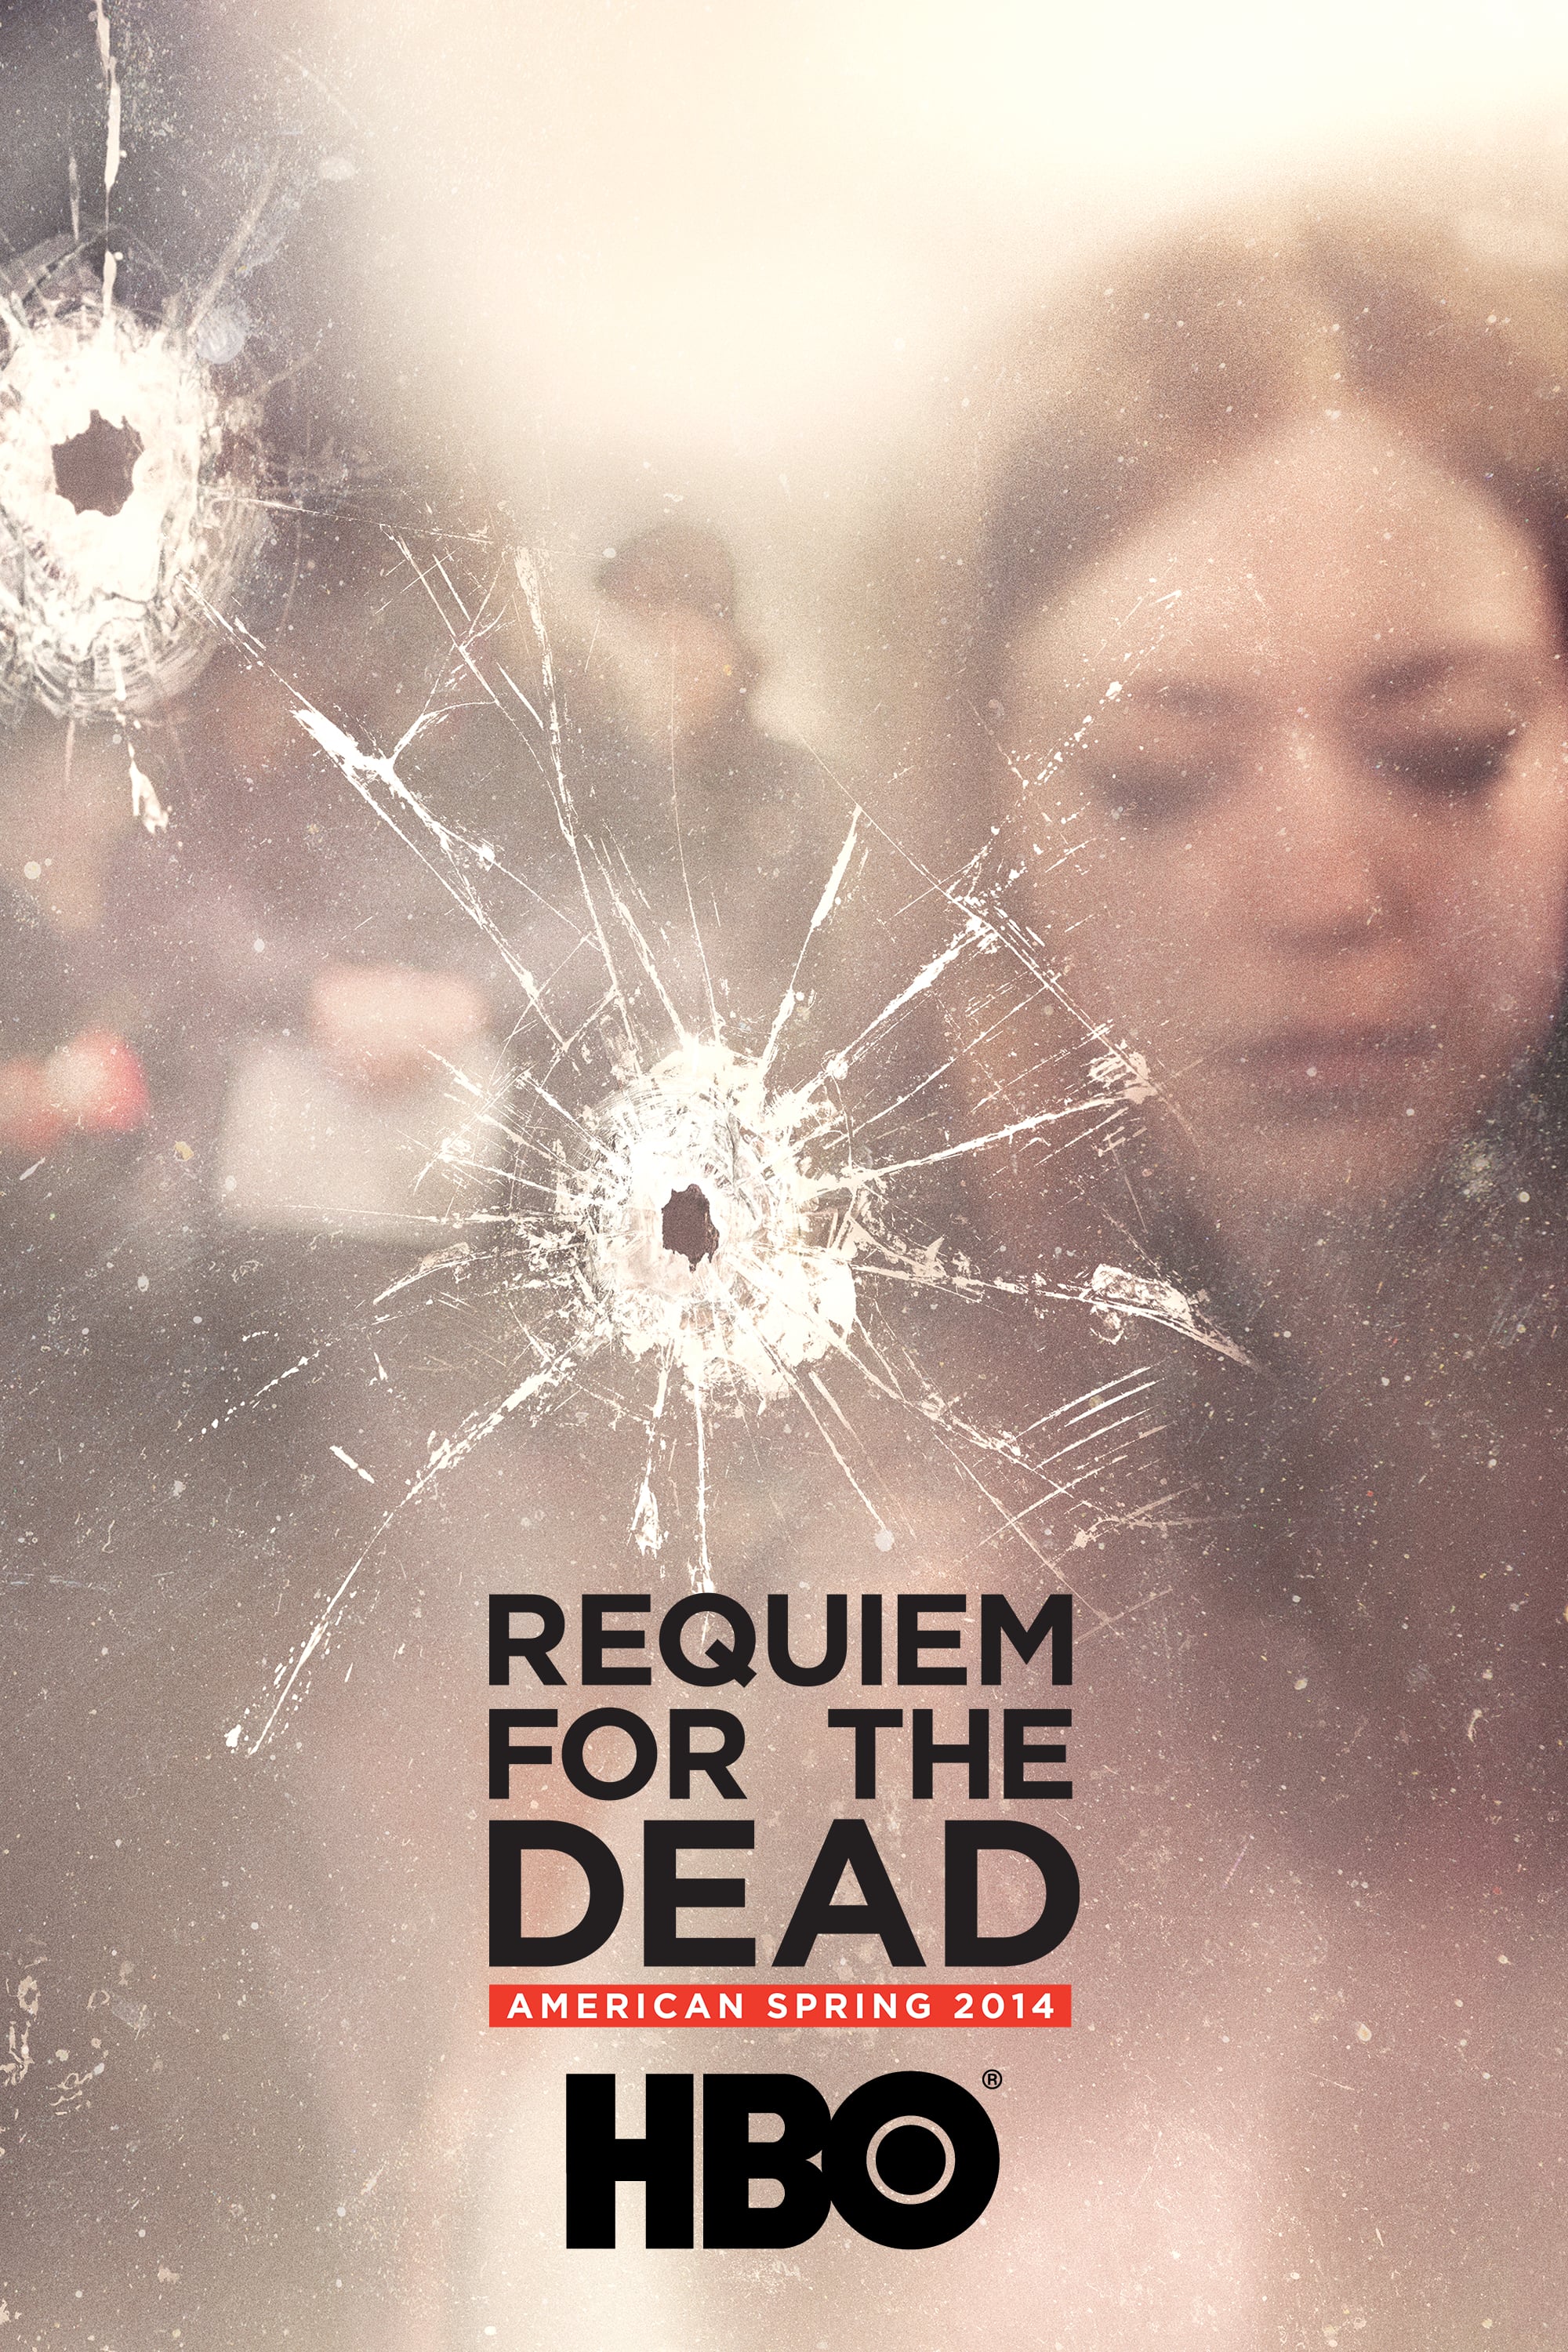 REQUIEM FOR THE DEAD: AMERICAN SPRING 2014